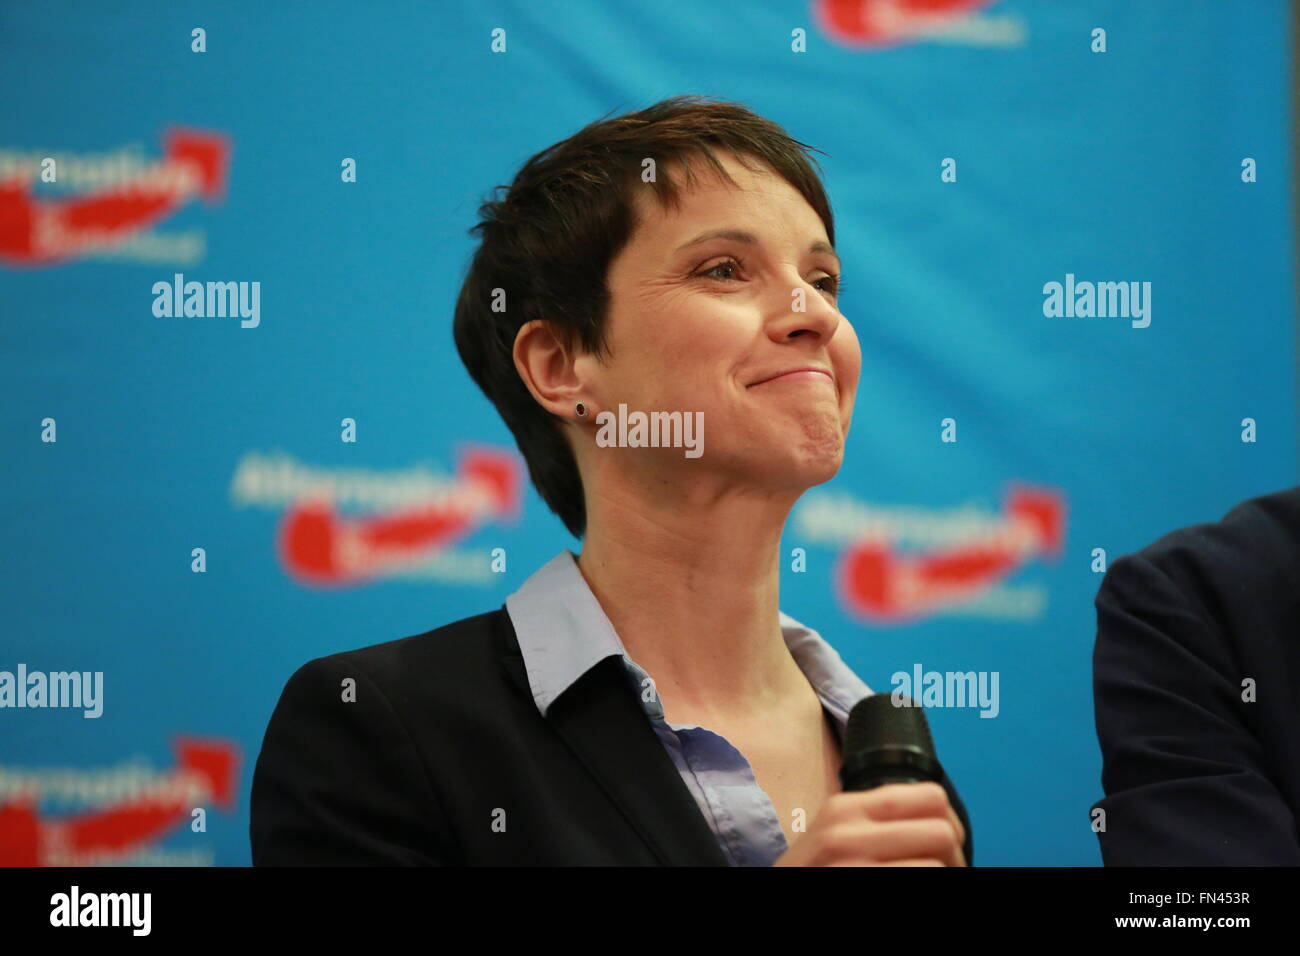 Berlin, Germany. 13th Mar, 2016. Party leader Frauke Petry during the election night of AfD (party) at AO hostel in Berlin's Lichtenberg district to the state elections in Baden-Württemberg, Rheinland-Pfalz and Sachsen-Anhalt. © Simone Kuhlmey/Pacific Press/Alamy Live News Stock Photo